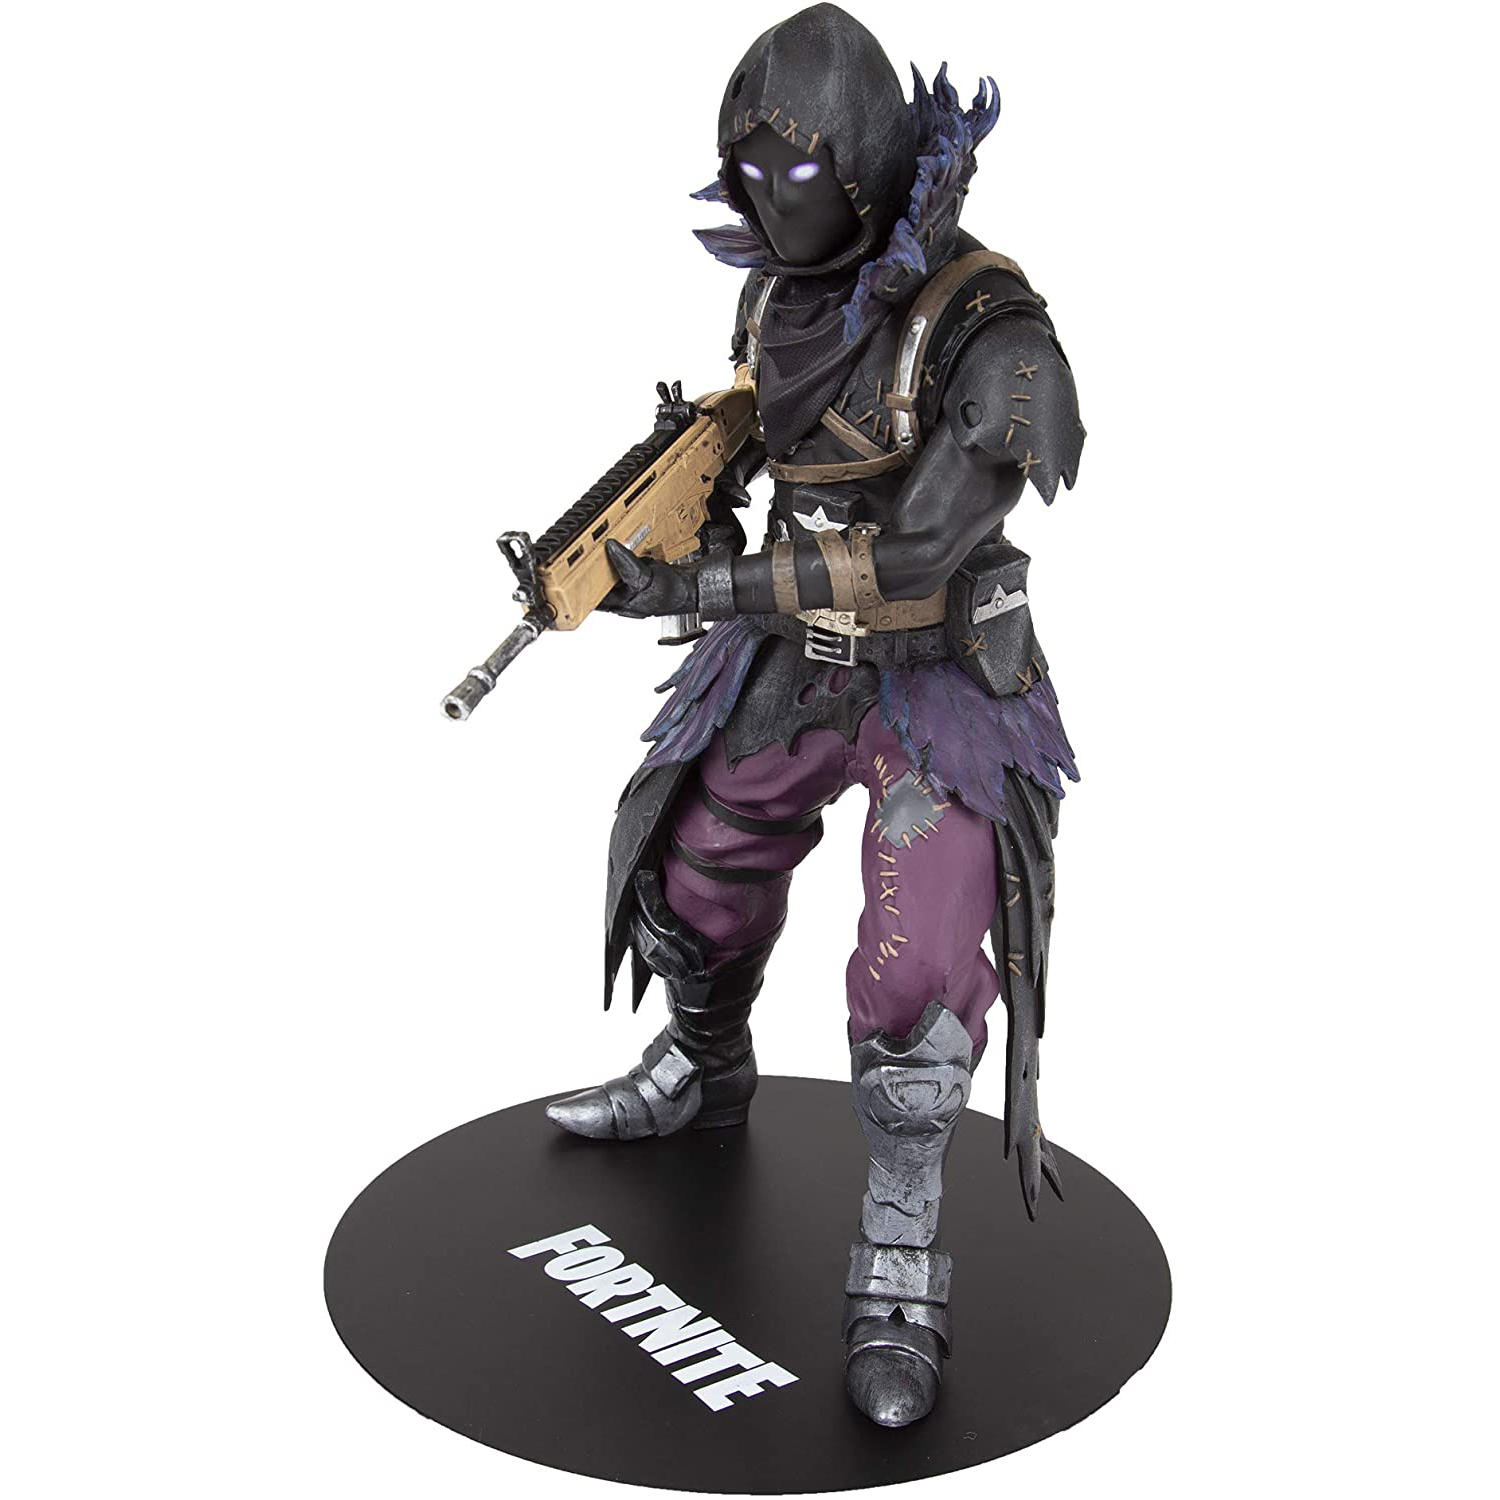 Mcfarlane Toys Fortnite Deluxe Box 11" Scale Scale Figures  Raven